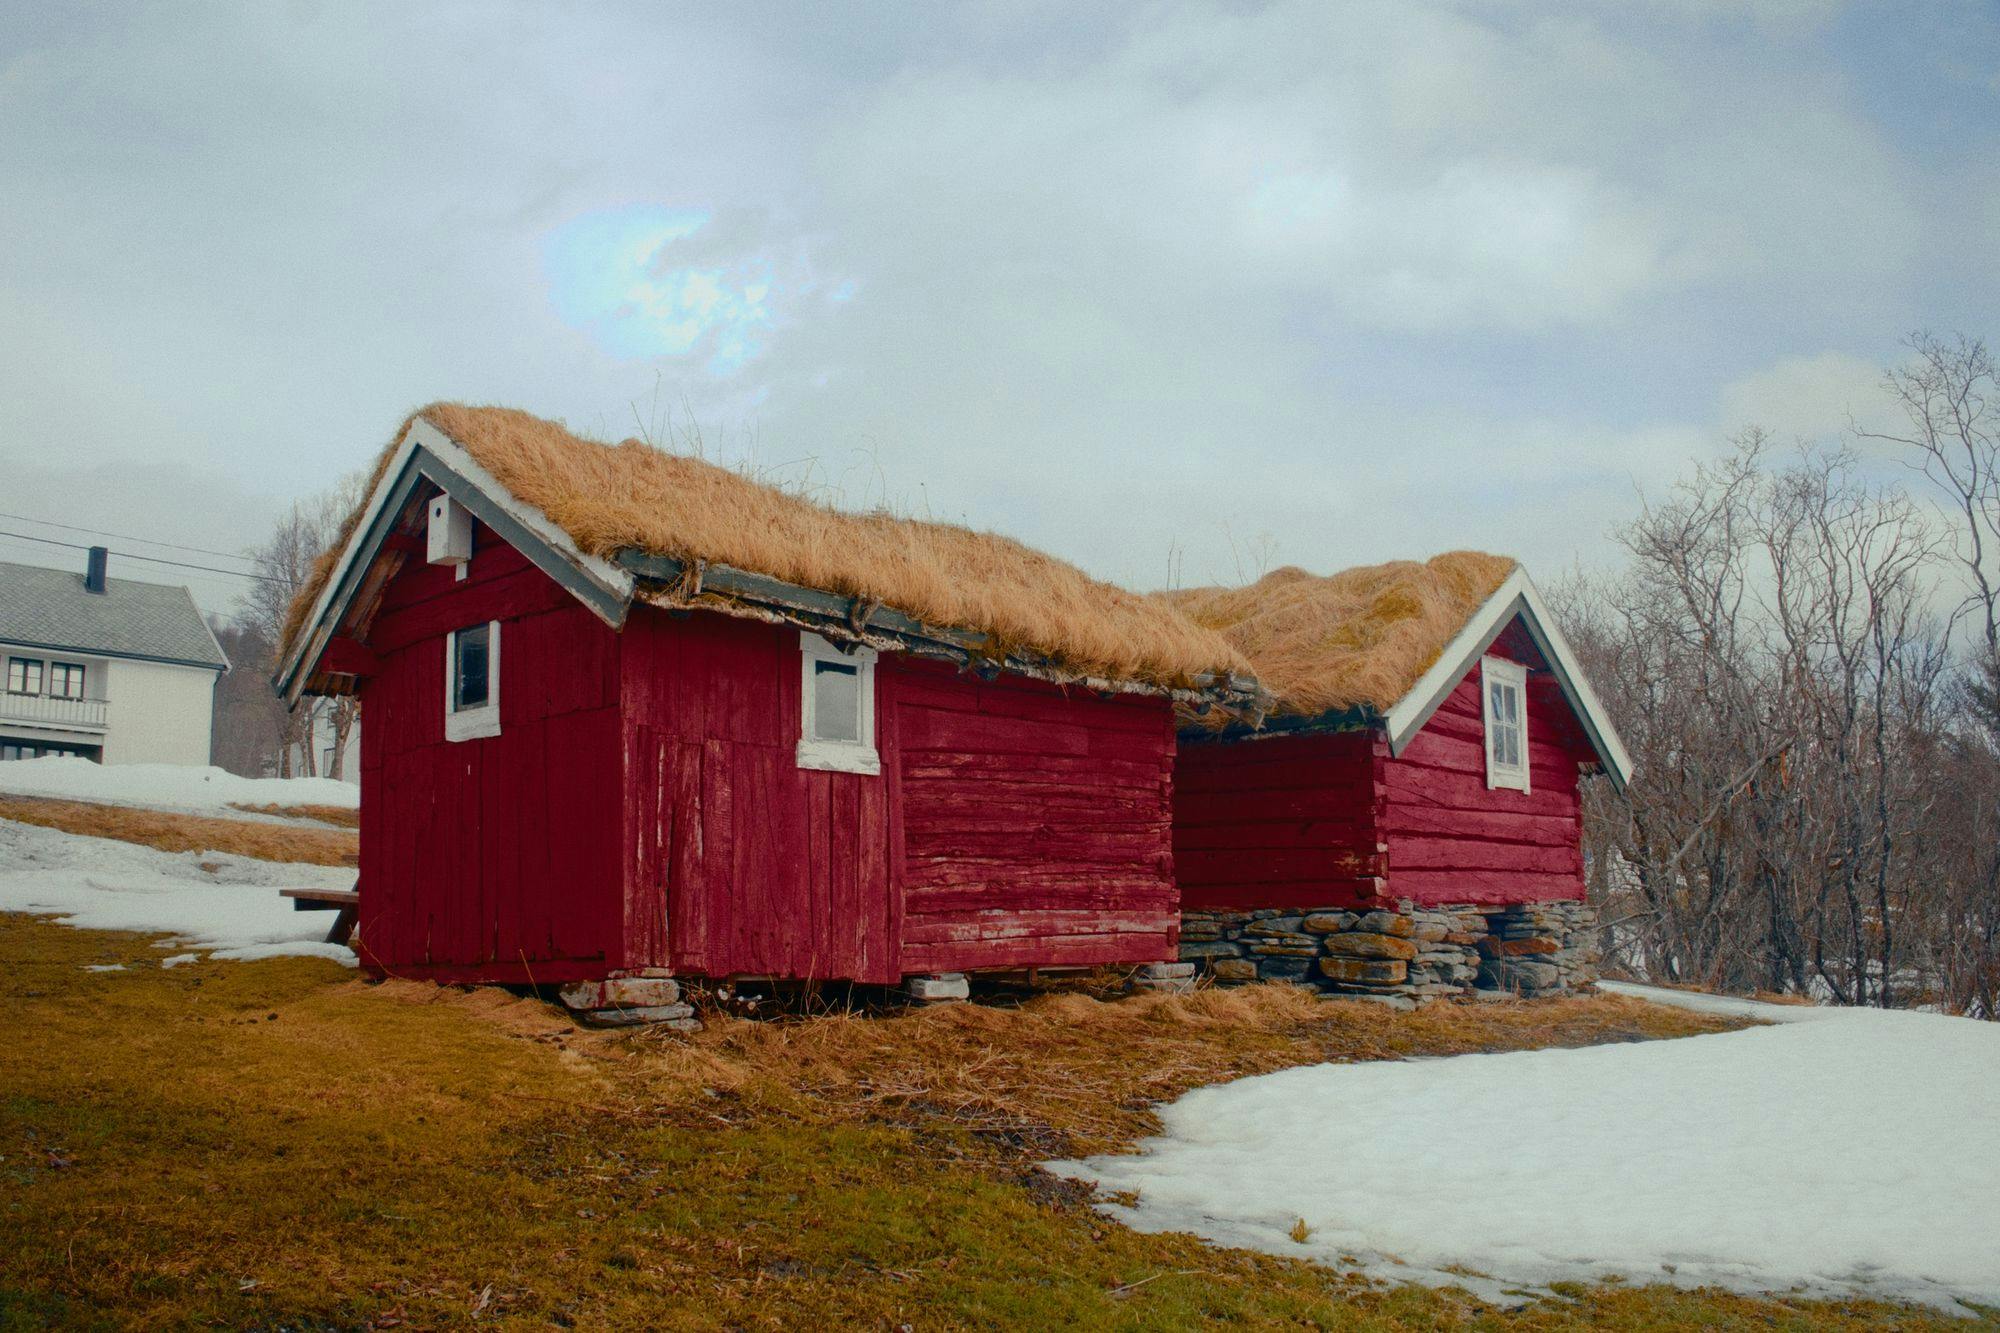 A traditional red Norweigan farmhouse